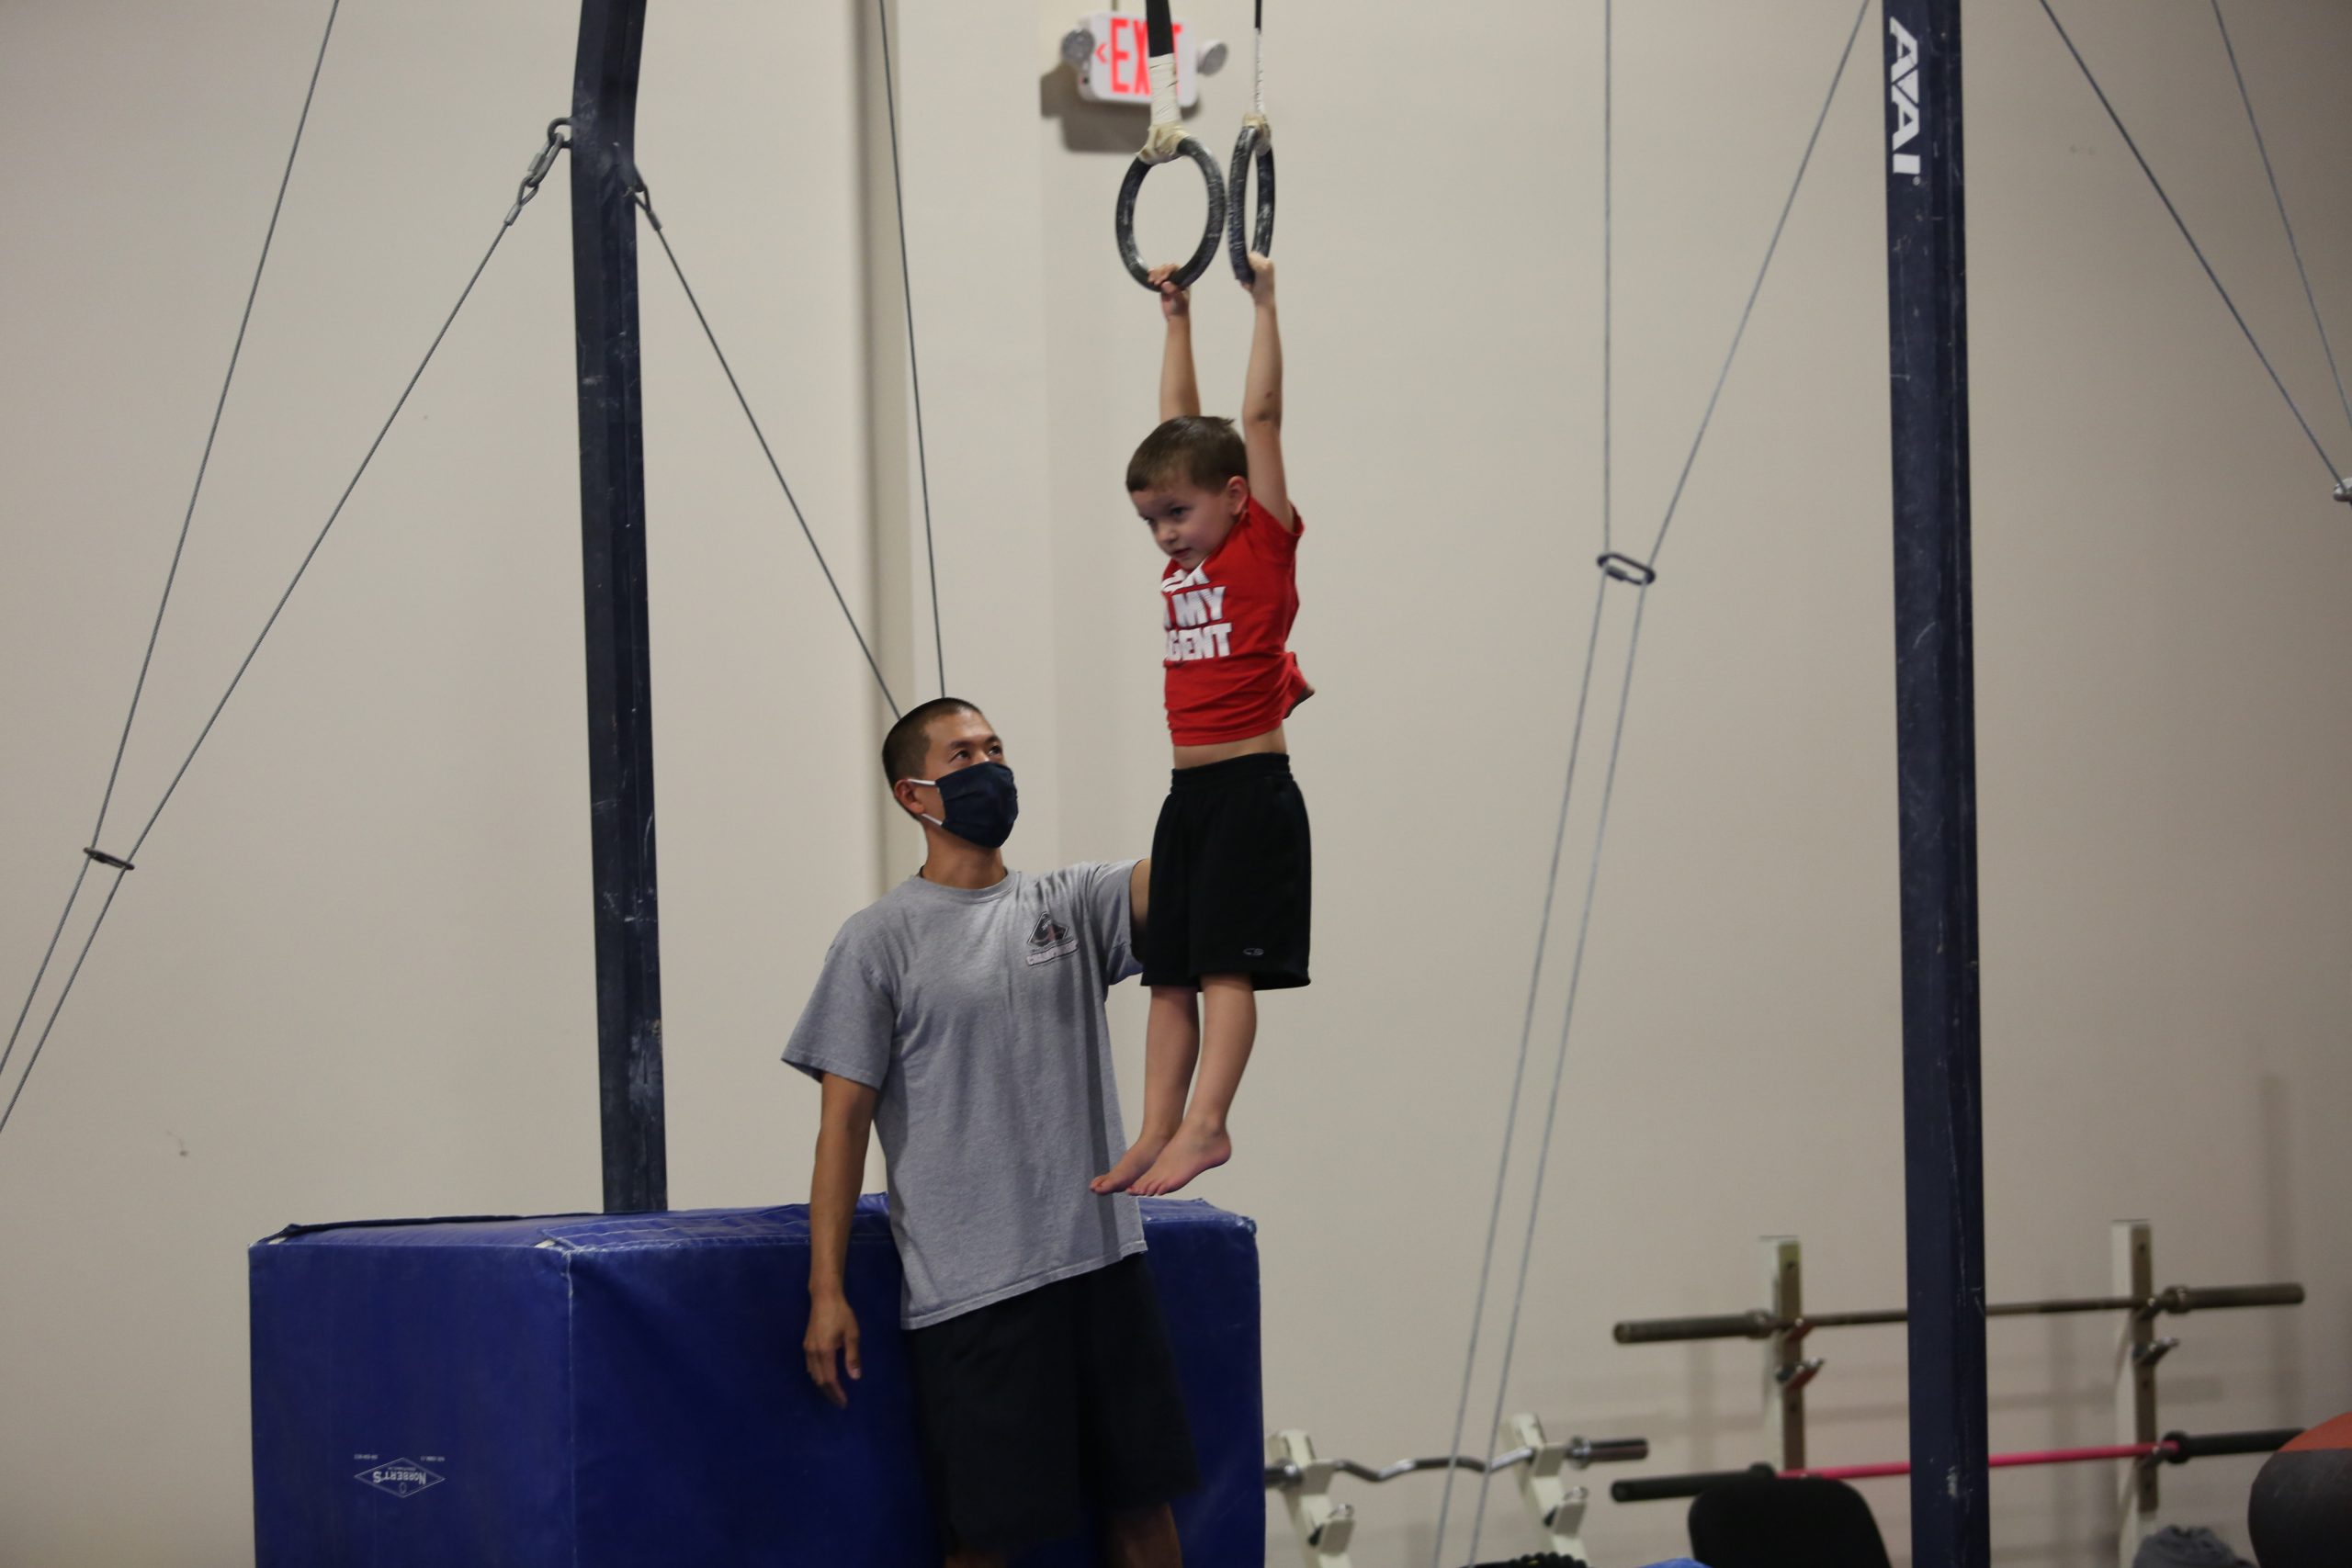 Boy on rings at Legends Gymnastics in North Andover, MA.